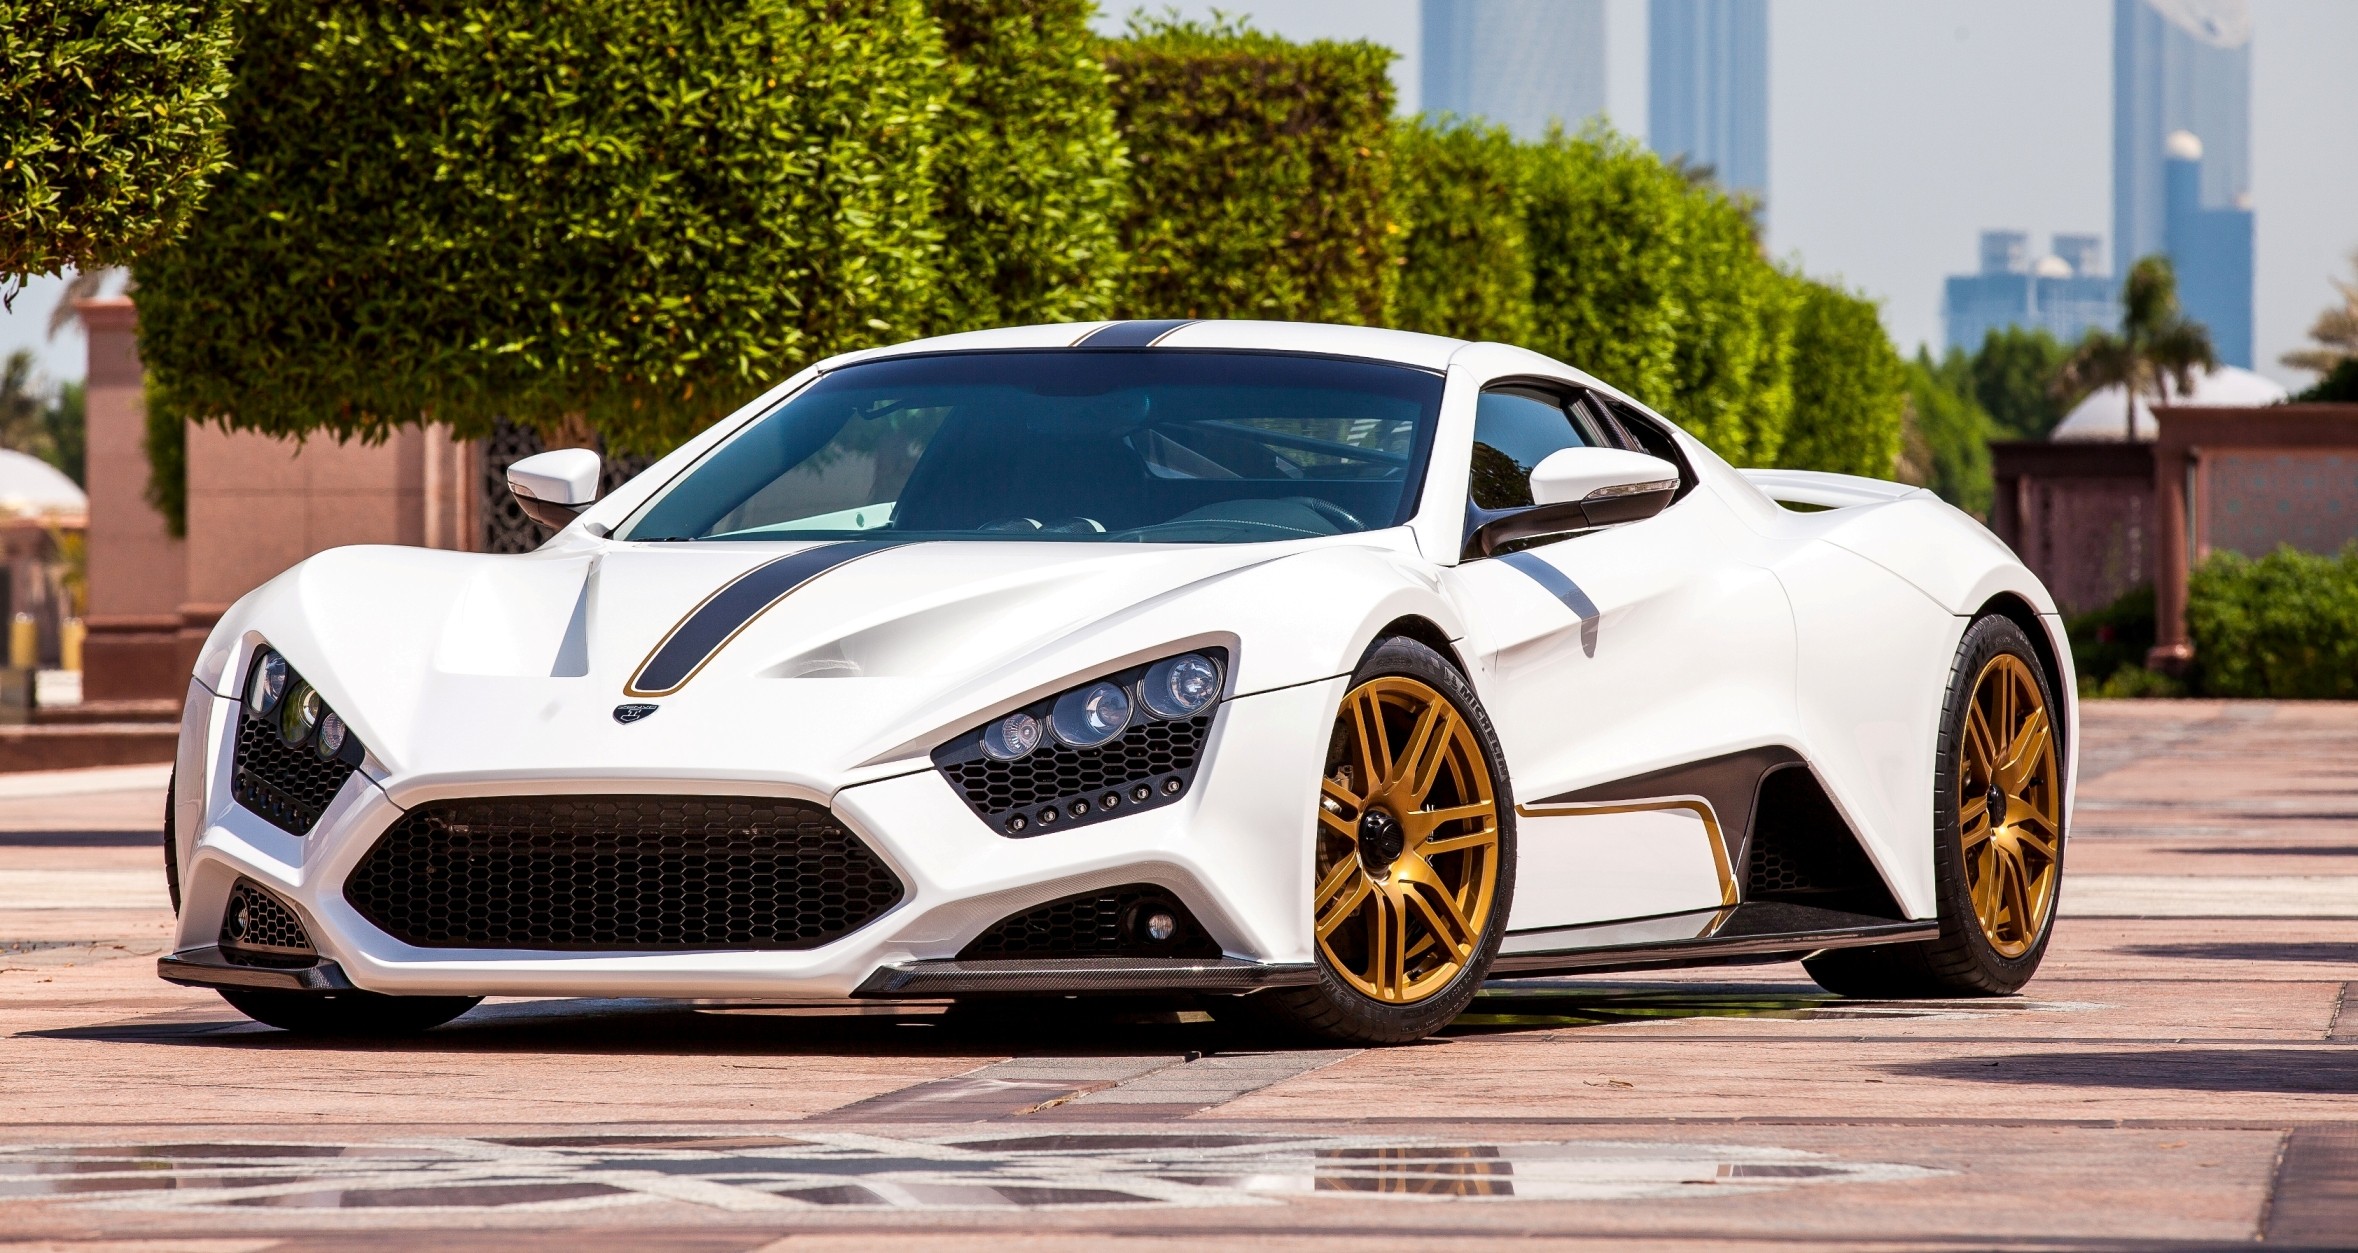 2.9s, 233MPH 2014 ZENVO ST1 Lands in USA With Stunning